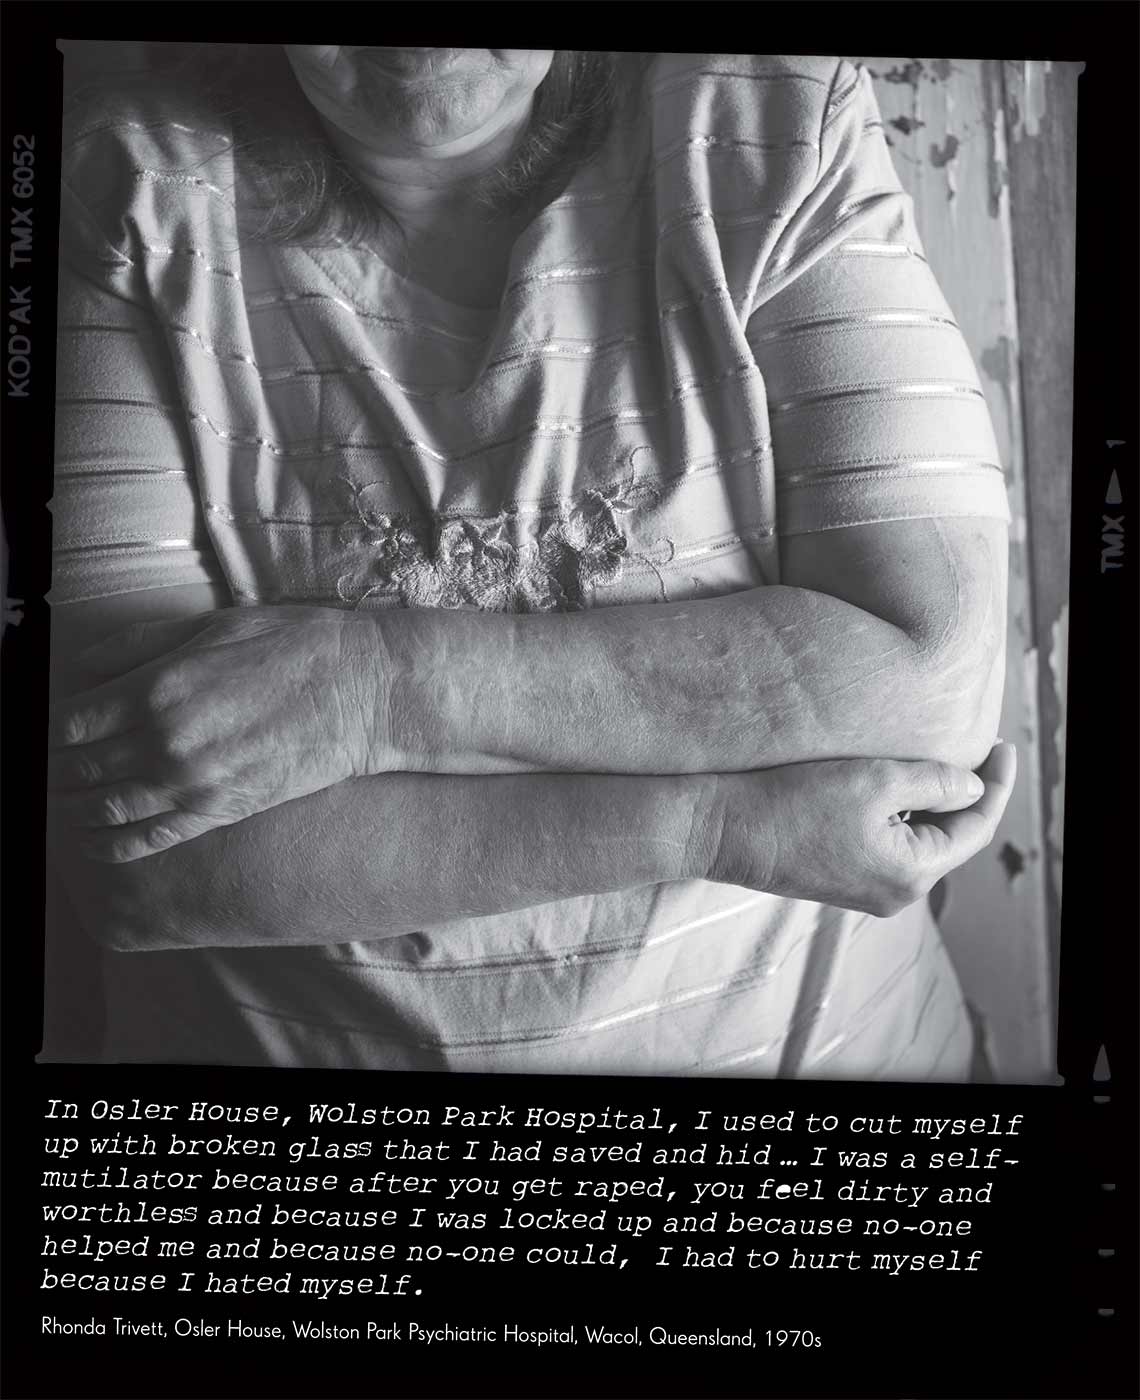 Black and white photo of a woman. She is standing with her arms folded and her face is not visible. The photo caption reads 'In Osler House, Wolston Park Hospital, I used to cut myself up with broken glass that I had saved and hid ... I was a self-mutilator because after you get raped, you feel dirty and worthless and because I was locked up and because no-one helped me and because no-one could, I had to hurt myself because I hated myself' attributed to 'Rhonda Trivett, Osler House, Wolston Park Psychiatric Hospital, Wacol, Queensland, 1970s'. - click to view larger image